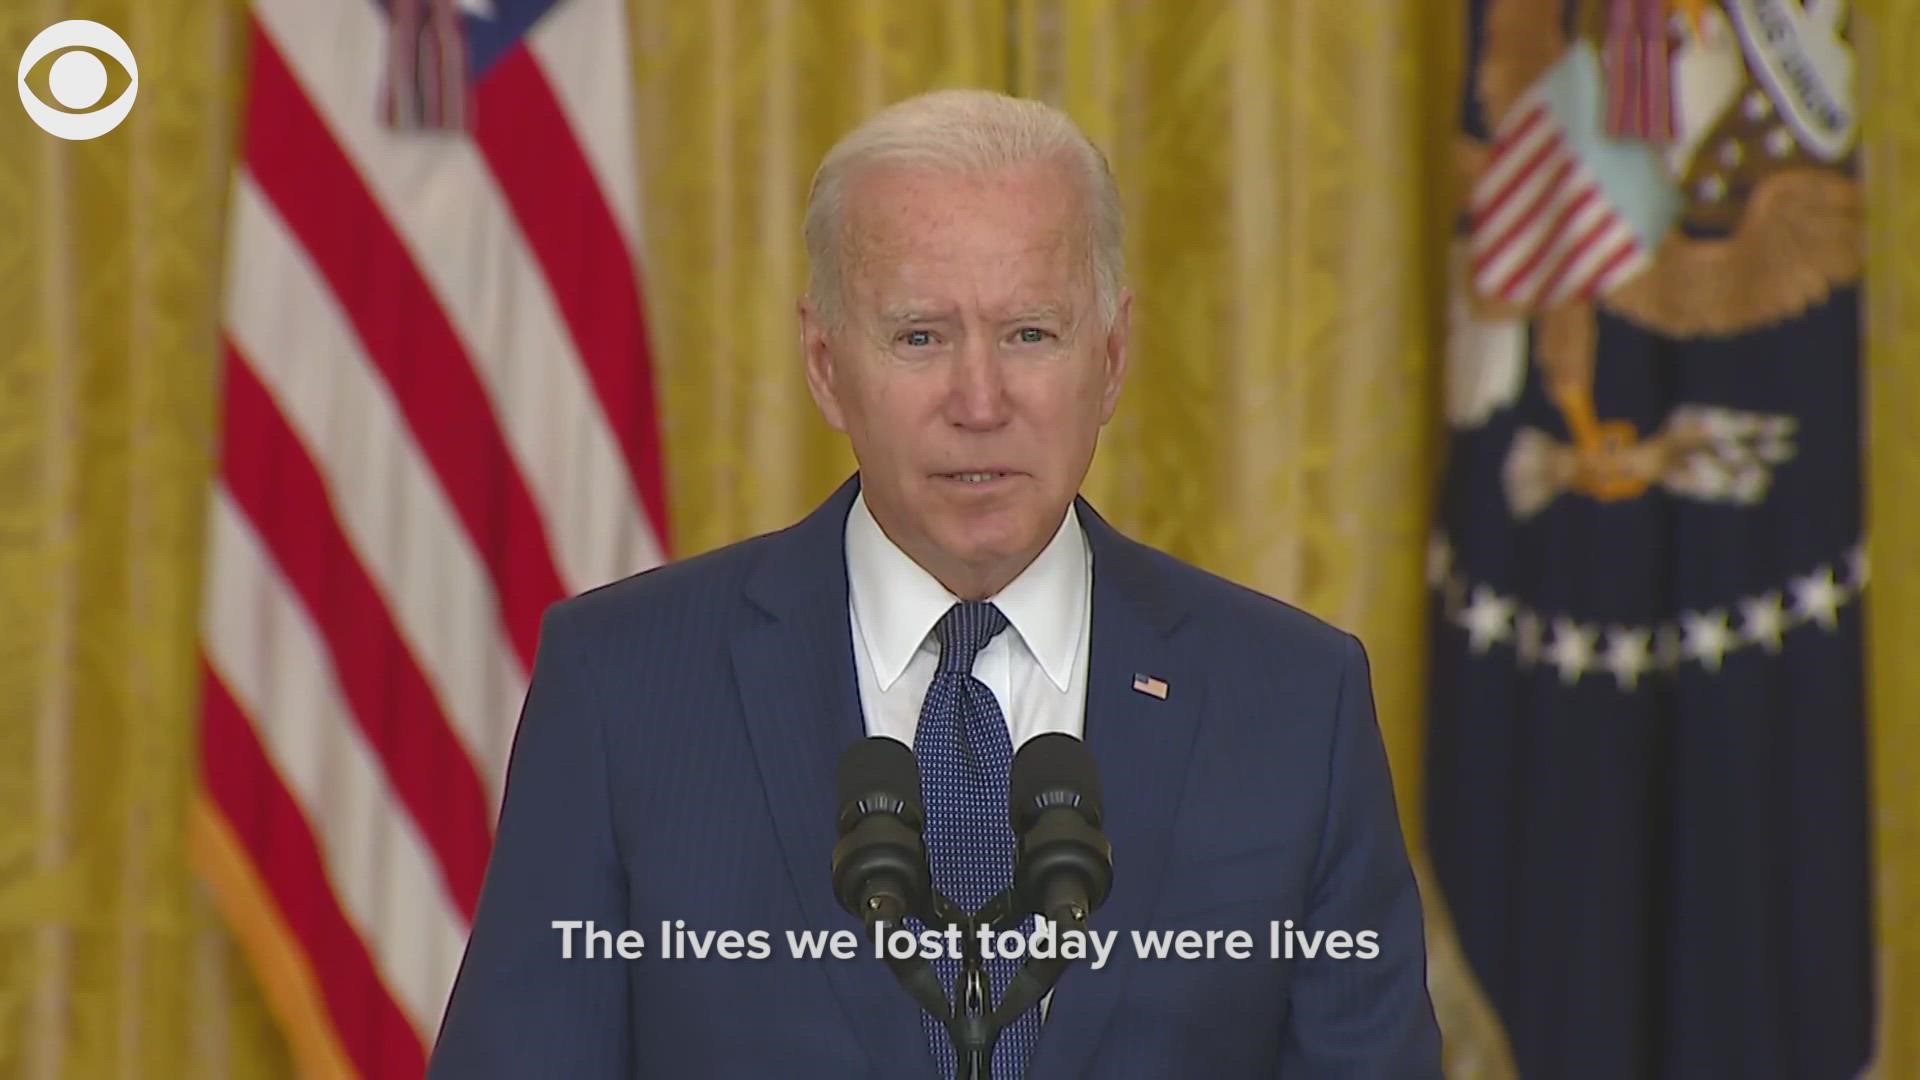 President Biden on Thursday addressed the attacks in Kabul, Afghanistan that killed U.S. service members others at the airport.